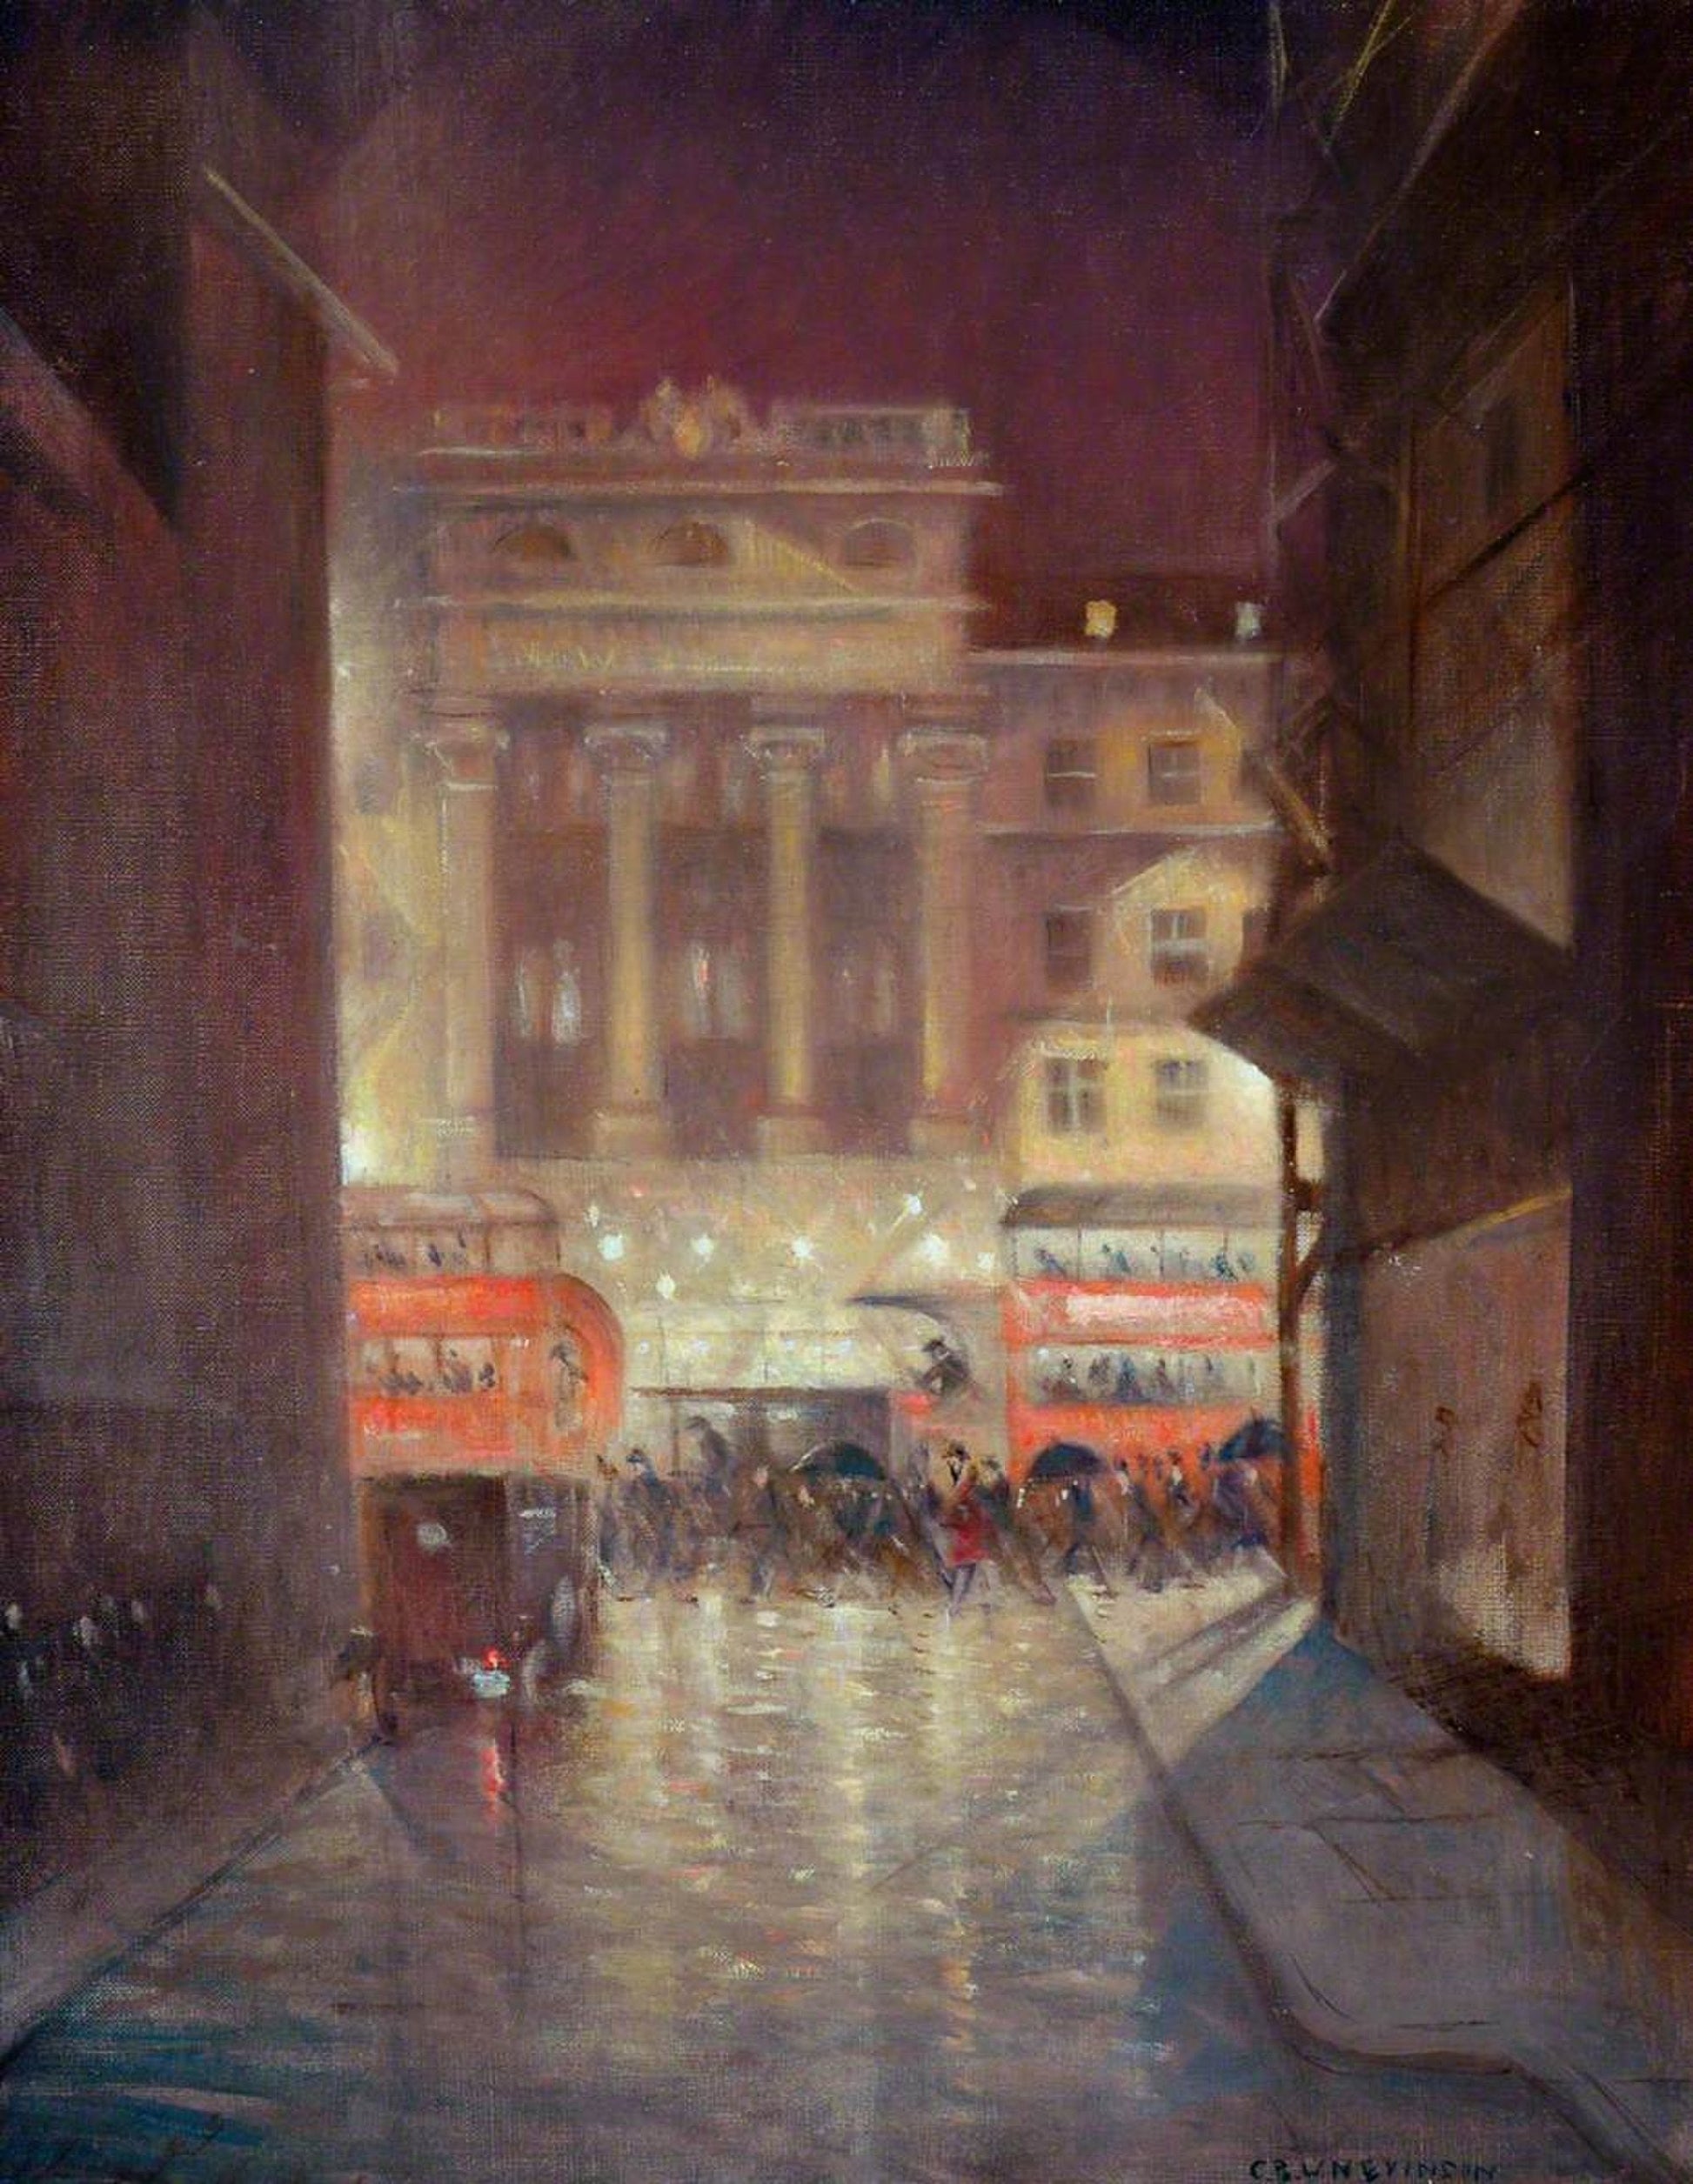 The Strand by Night (London, 1930s) | Christopher R. W. Nevinson artwork Posters, Prints, & Visual Artwork The Trumpet Shop   